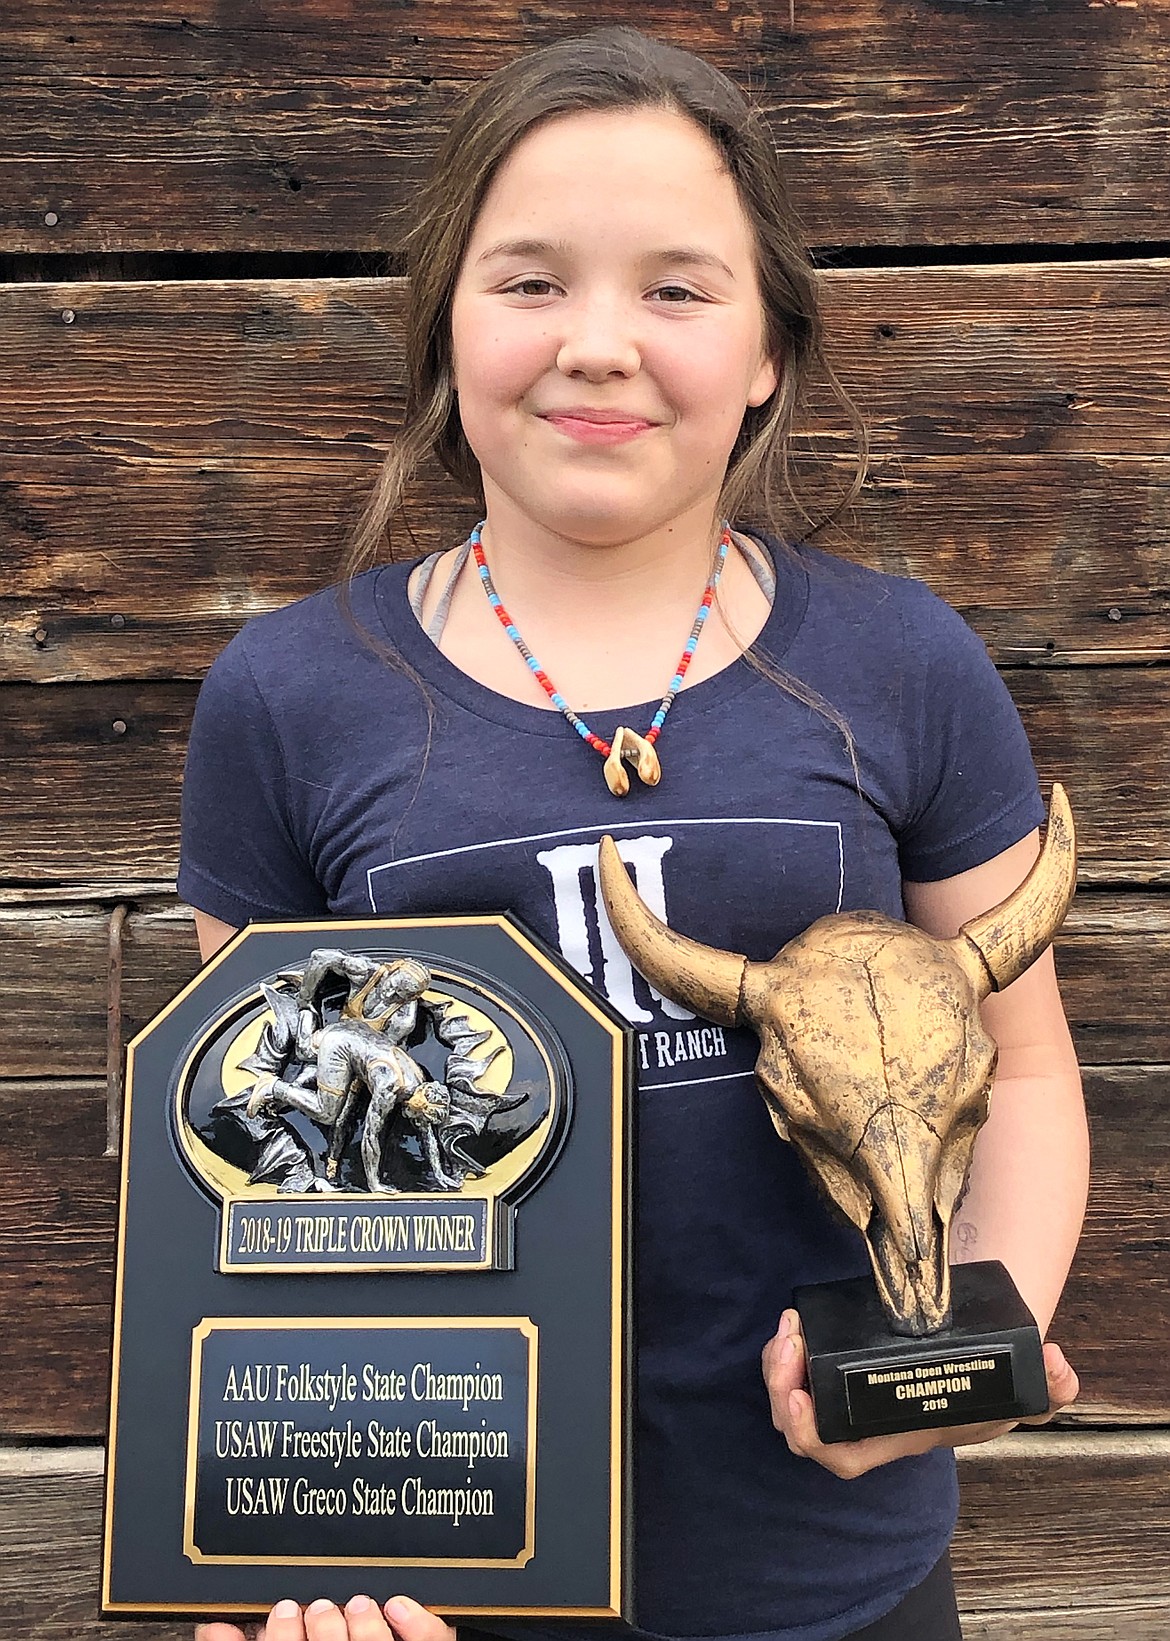 Brynn Courville with her AAU/USA-W 2018-19 Triple Crown trophy and 2019 Montana Open Champion trophy. (Photo provided by Brynn Courville)